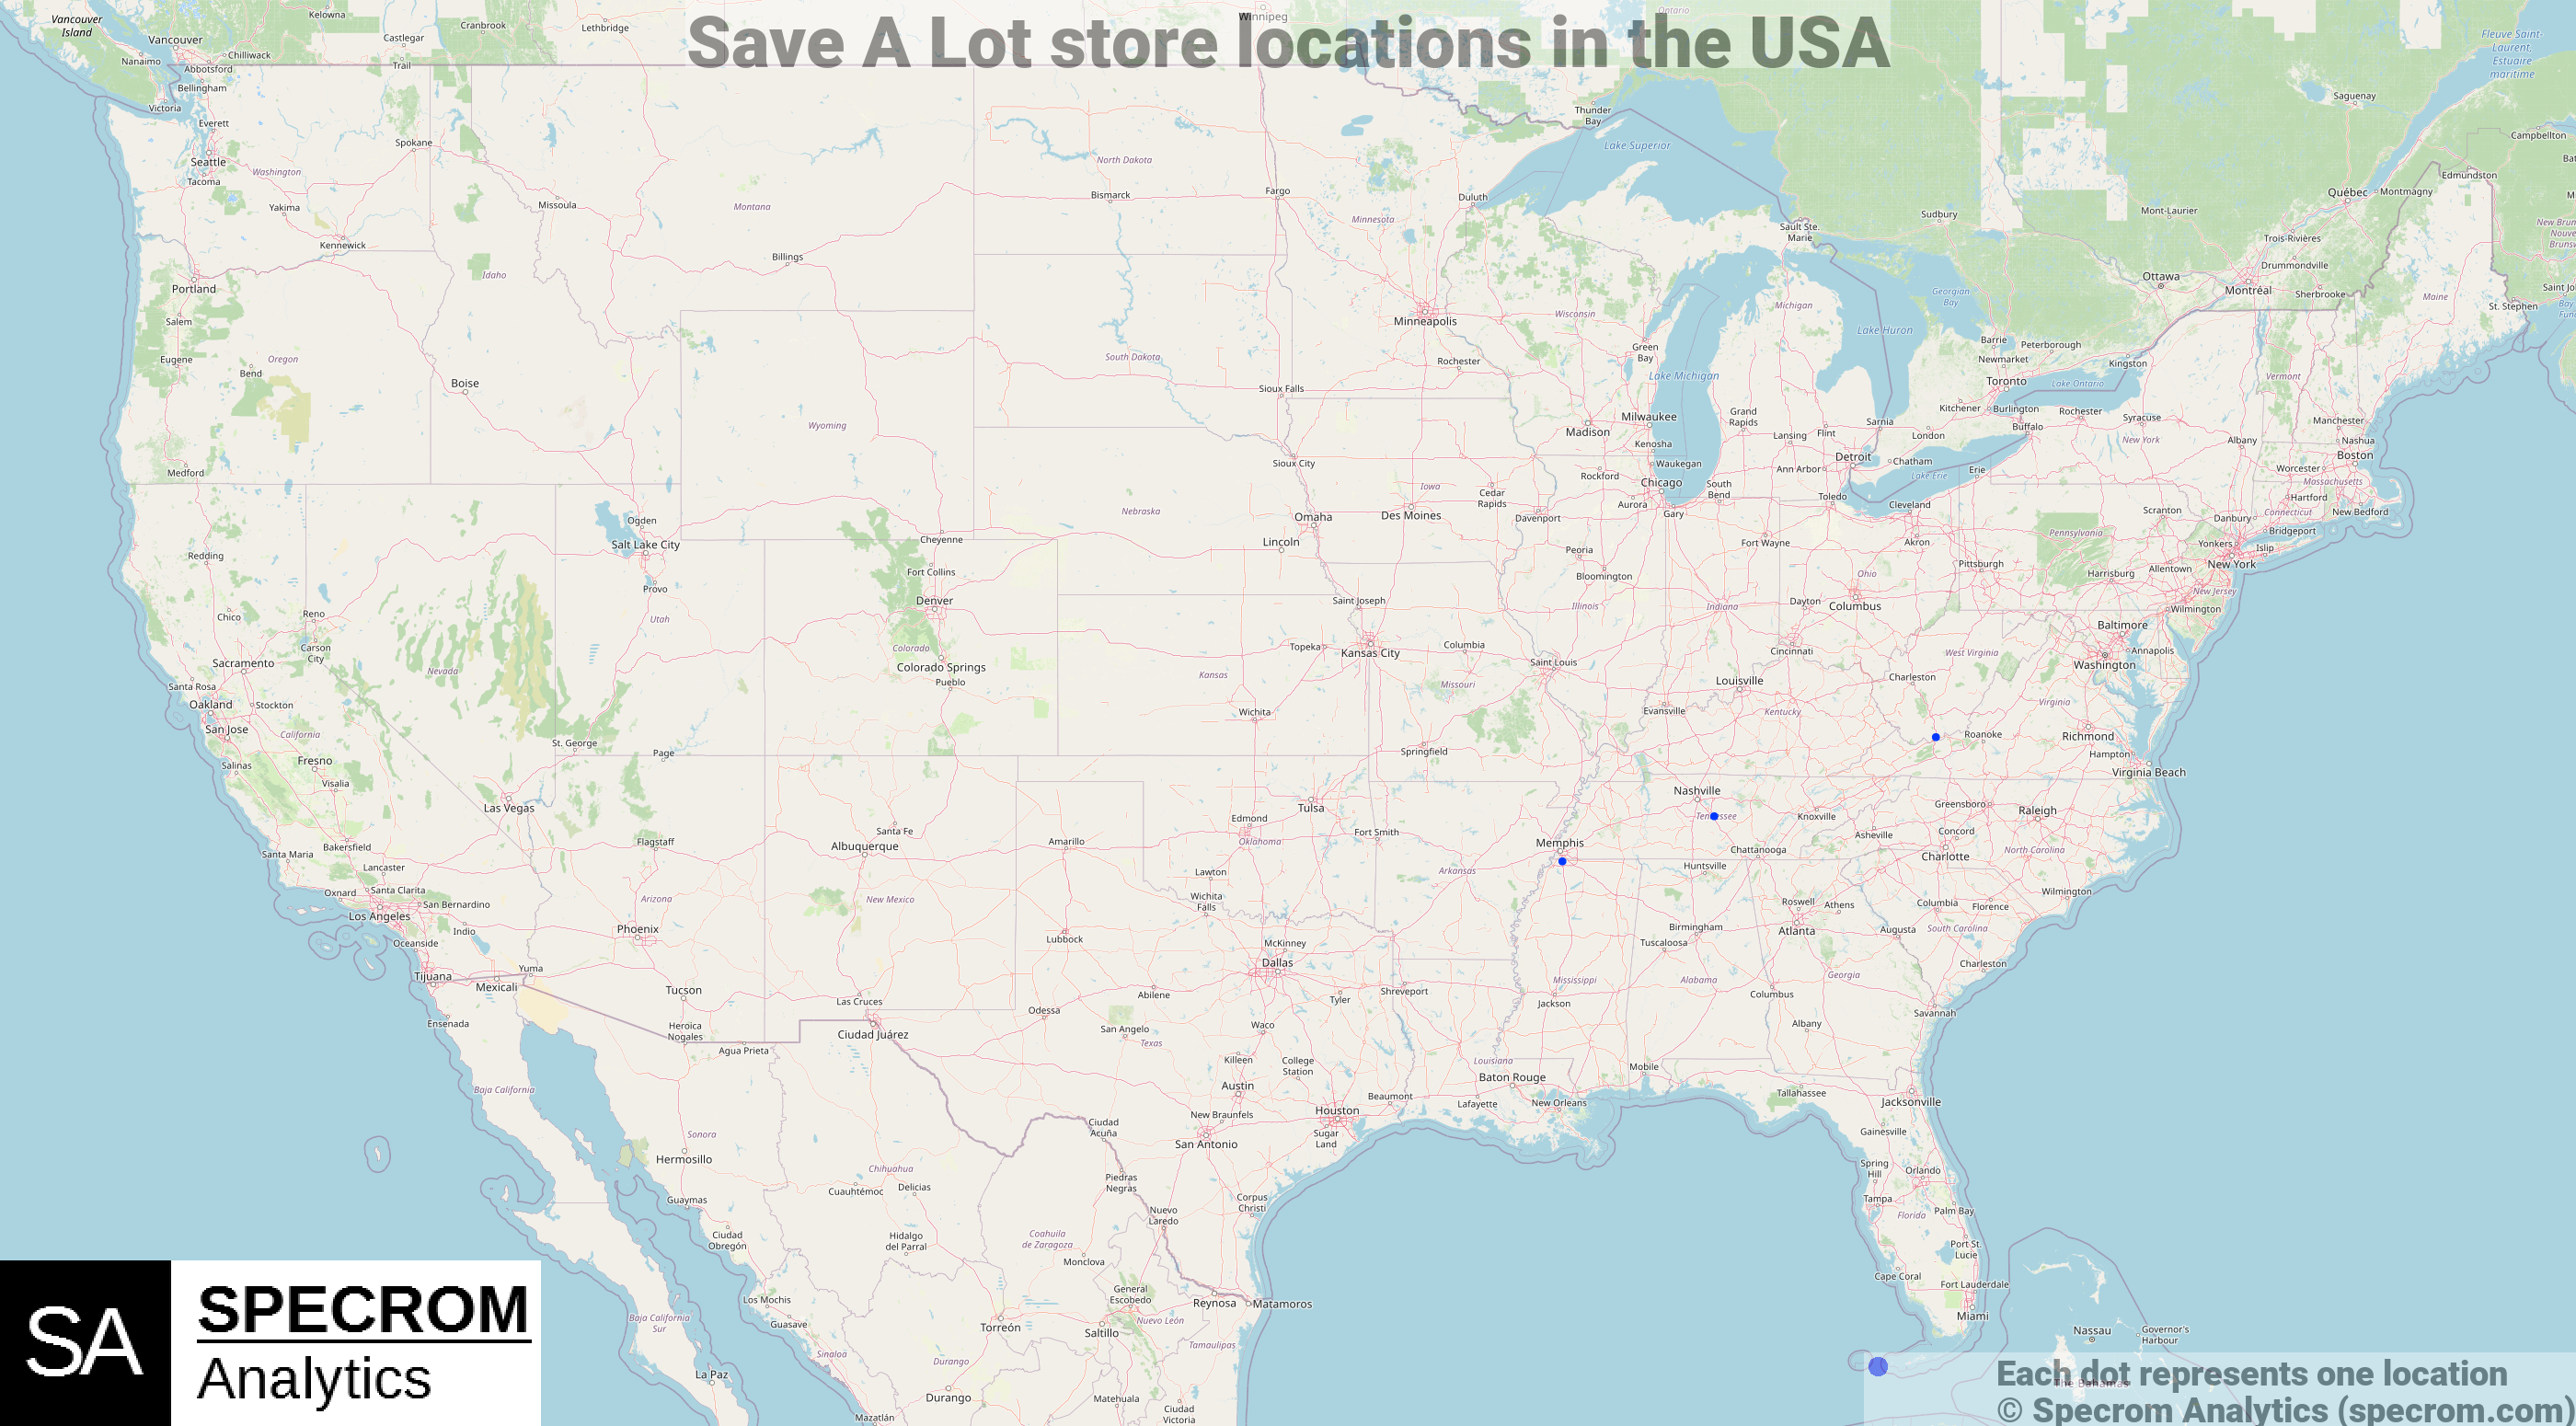 Save A Lot store locations in the USA